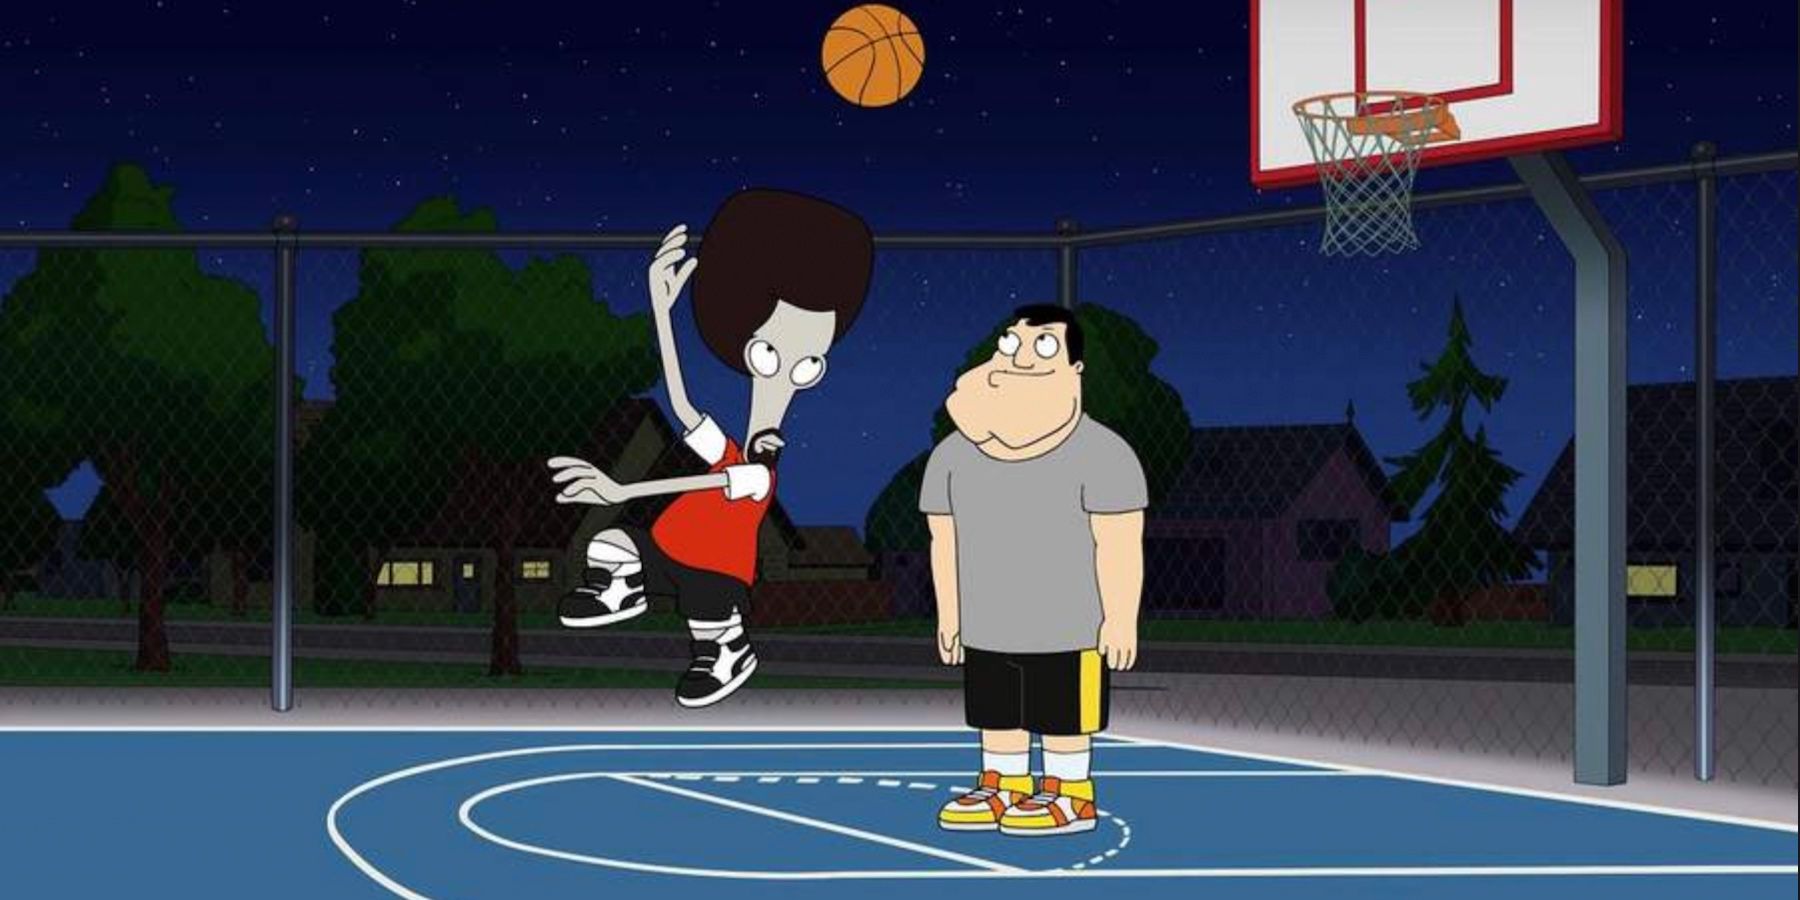 Roger plays basketball with Stan in "Criss-Cross Applesauce" episode of American Dad